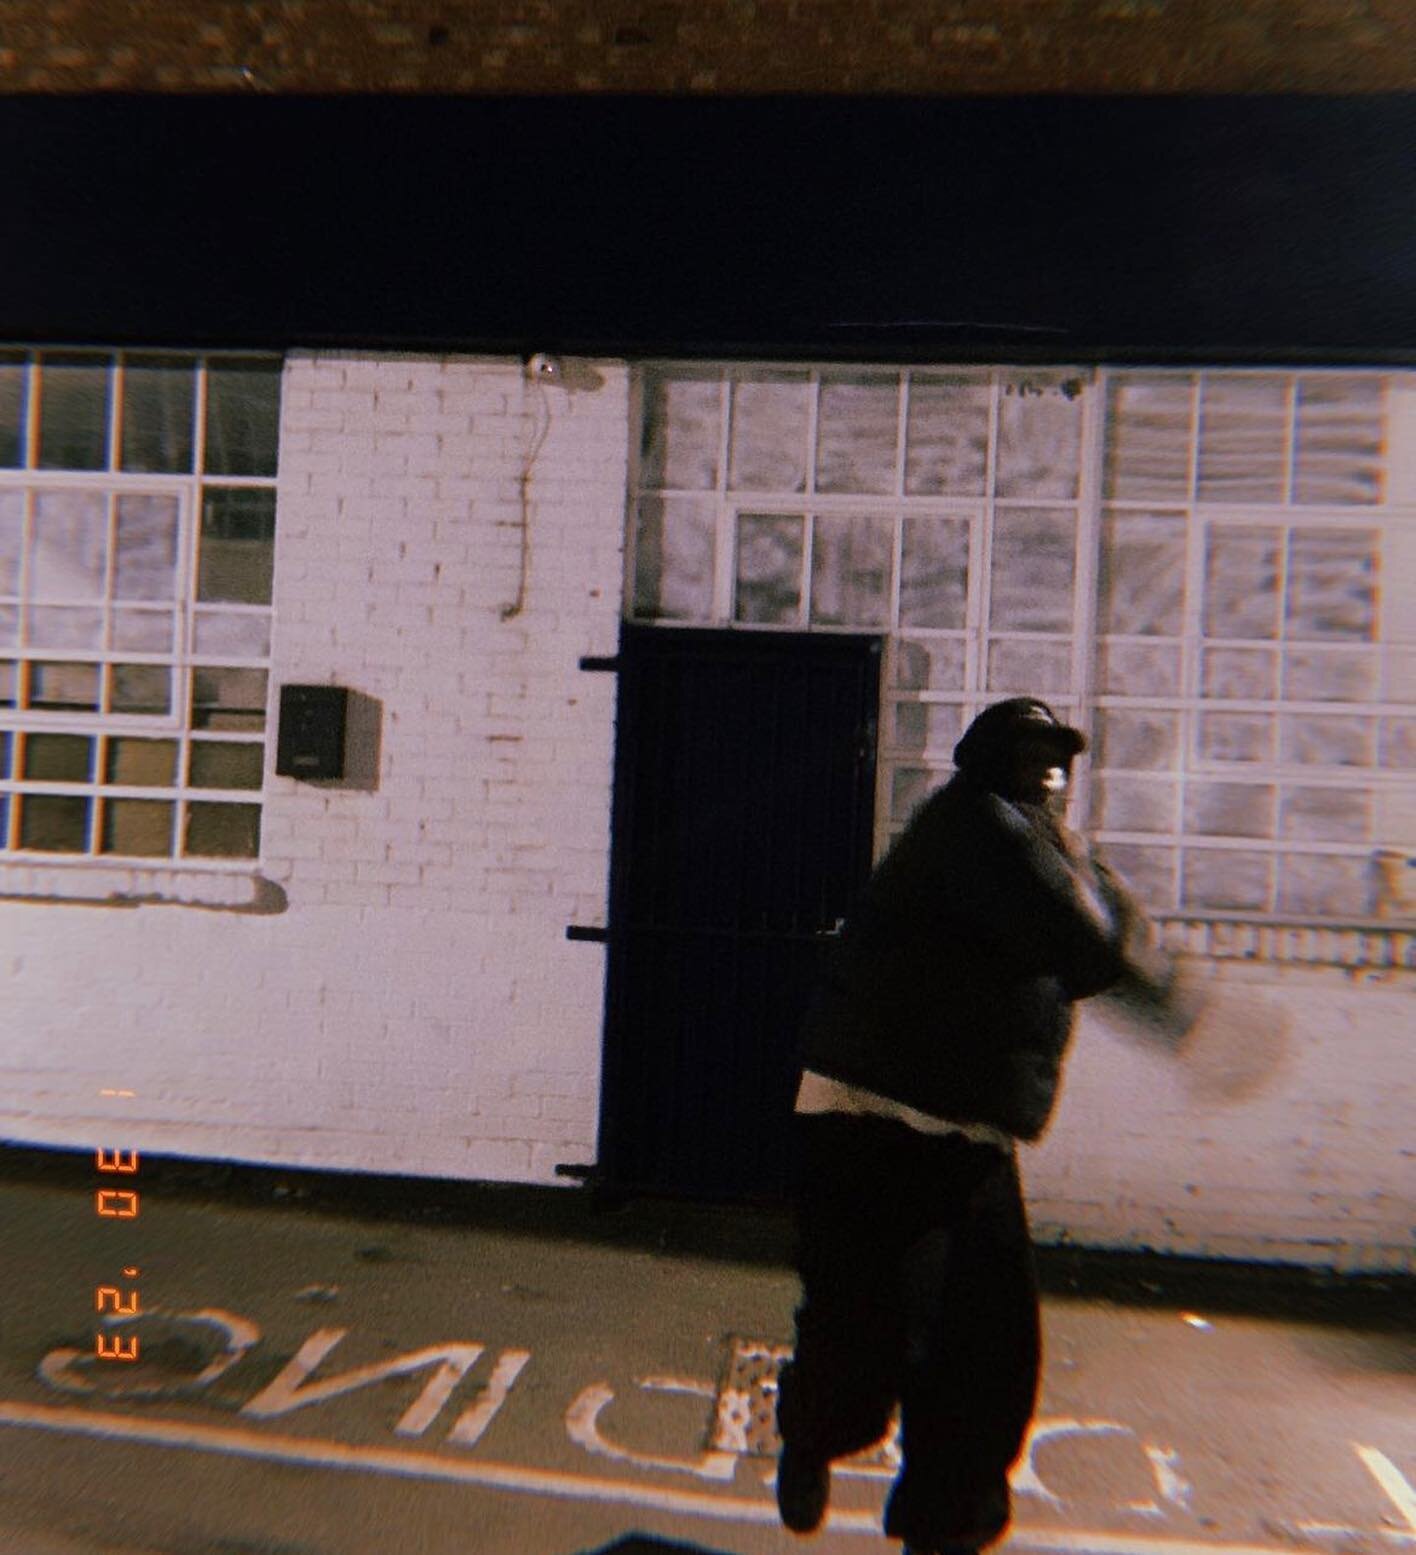 ALL EYES ON: ISAIAH SHOTICAURY

East London&rsquo;s problem child @thelowkeyintrovert has been putting in WORK for a minute. When I first became aware of Isaiah, he was a frequent attendant at different shows, very low-key &amp; taking everything in.